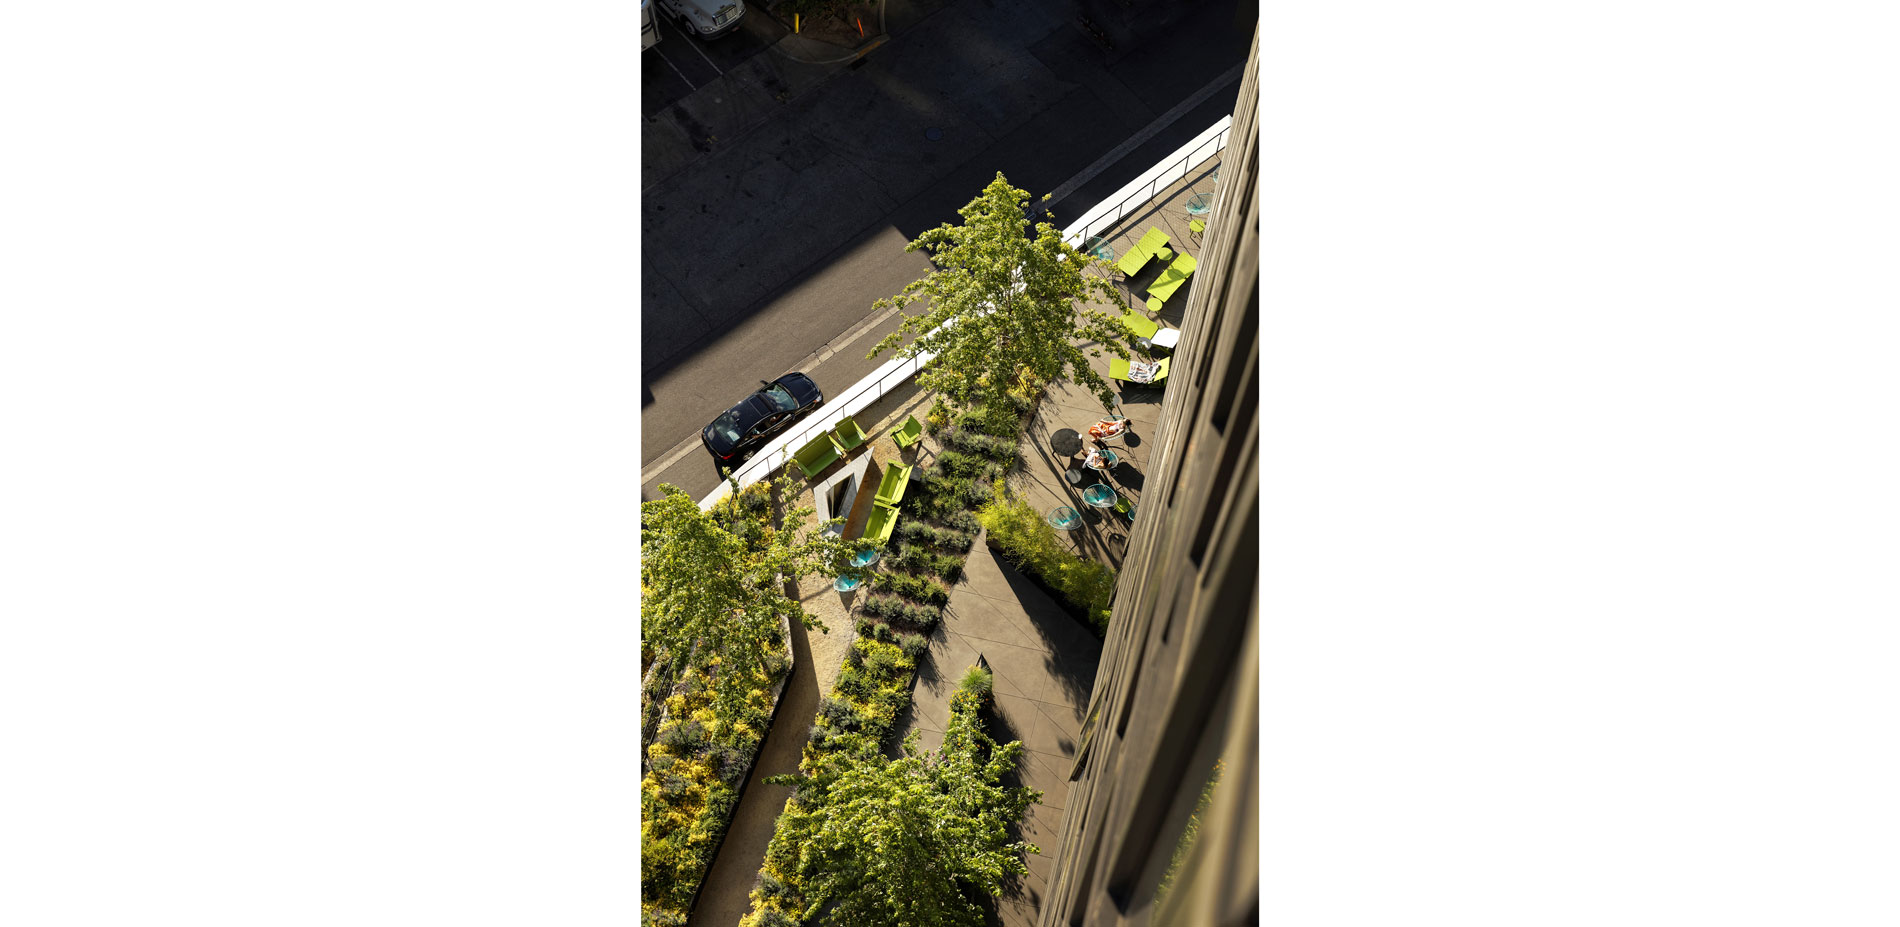 The roof garden creates a variety of intimate social spaces for residents and retail space visitors.  …